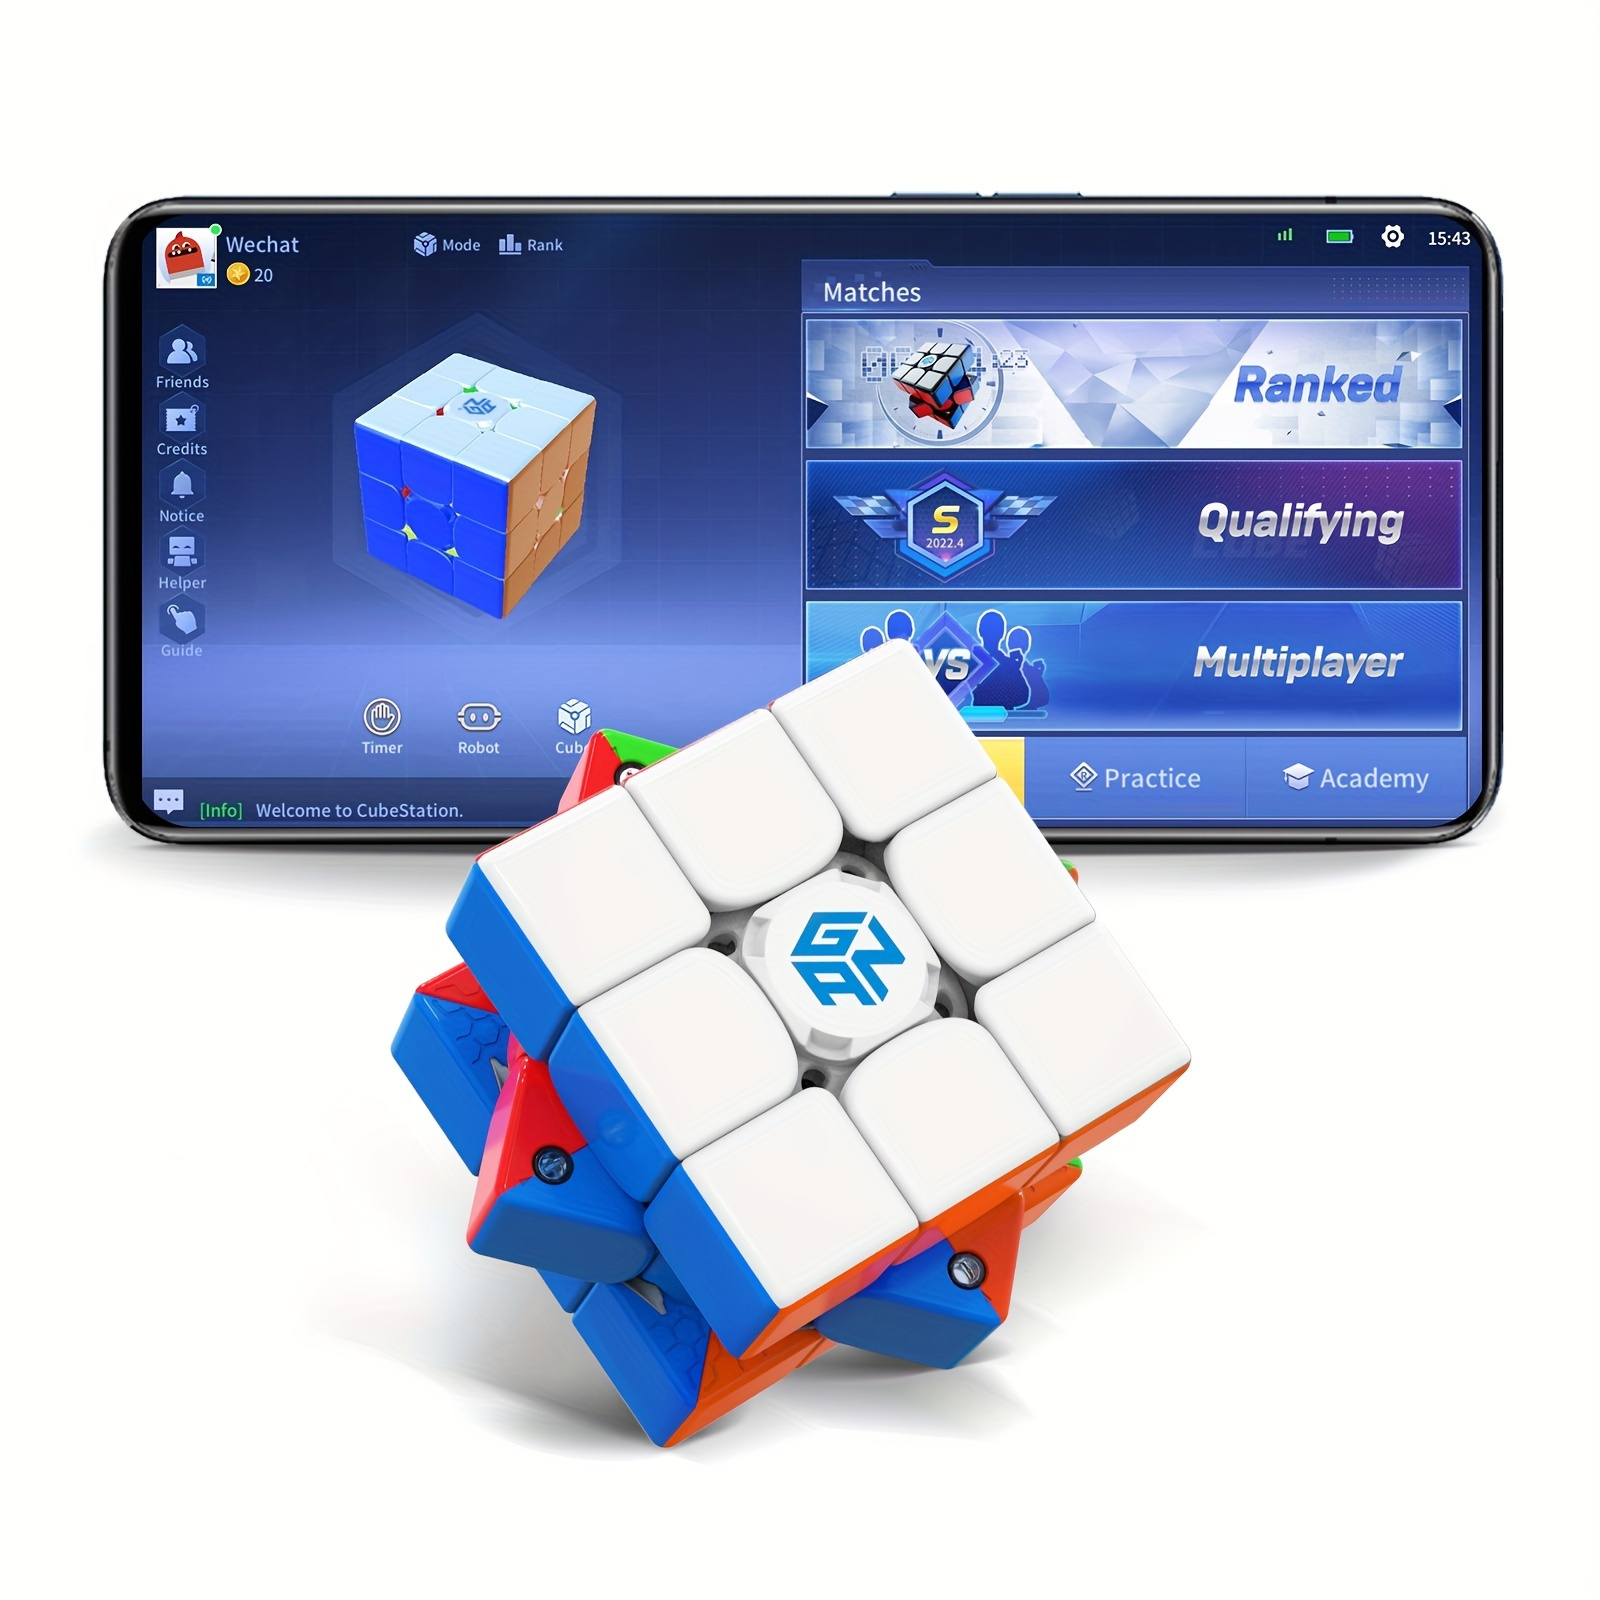 Beyong 3x3 Magnetic Speed Cube 3x3x3 Smooth Magic Cube Stikerless Puzzle